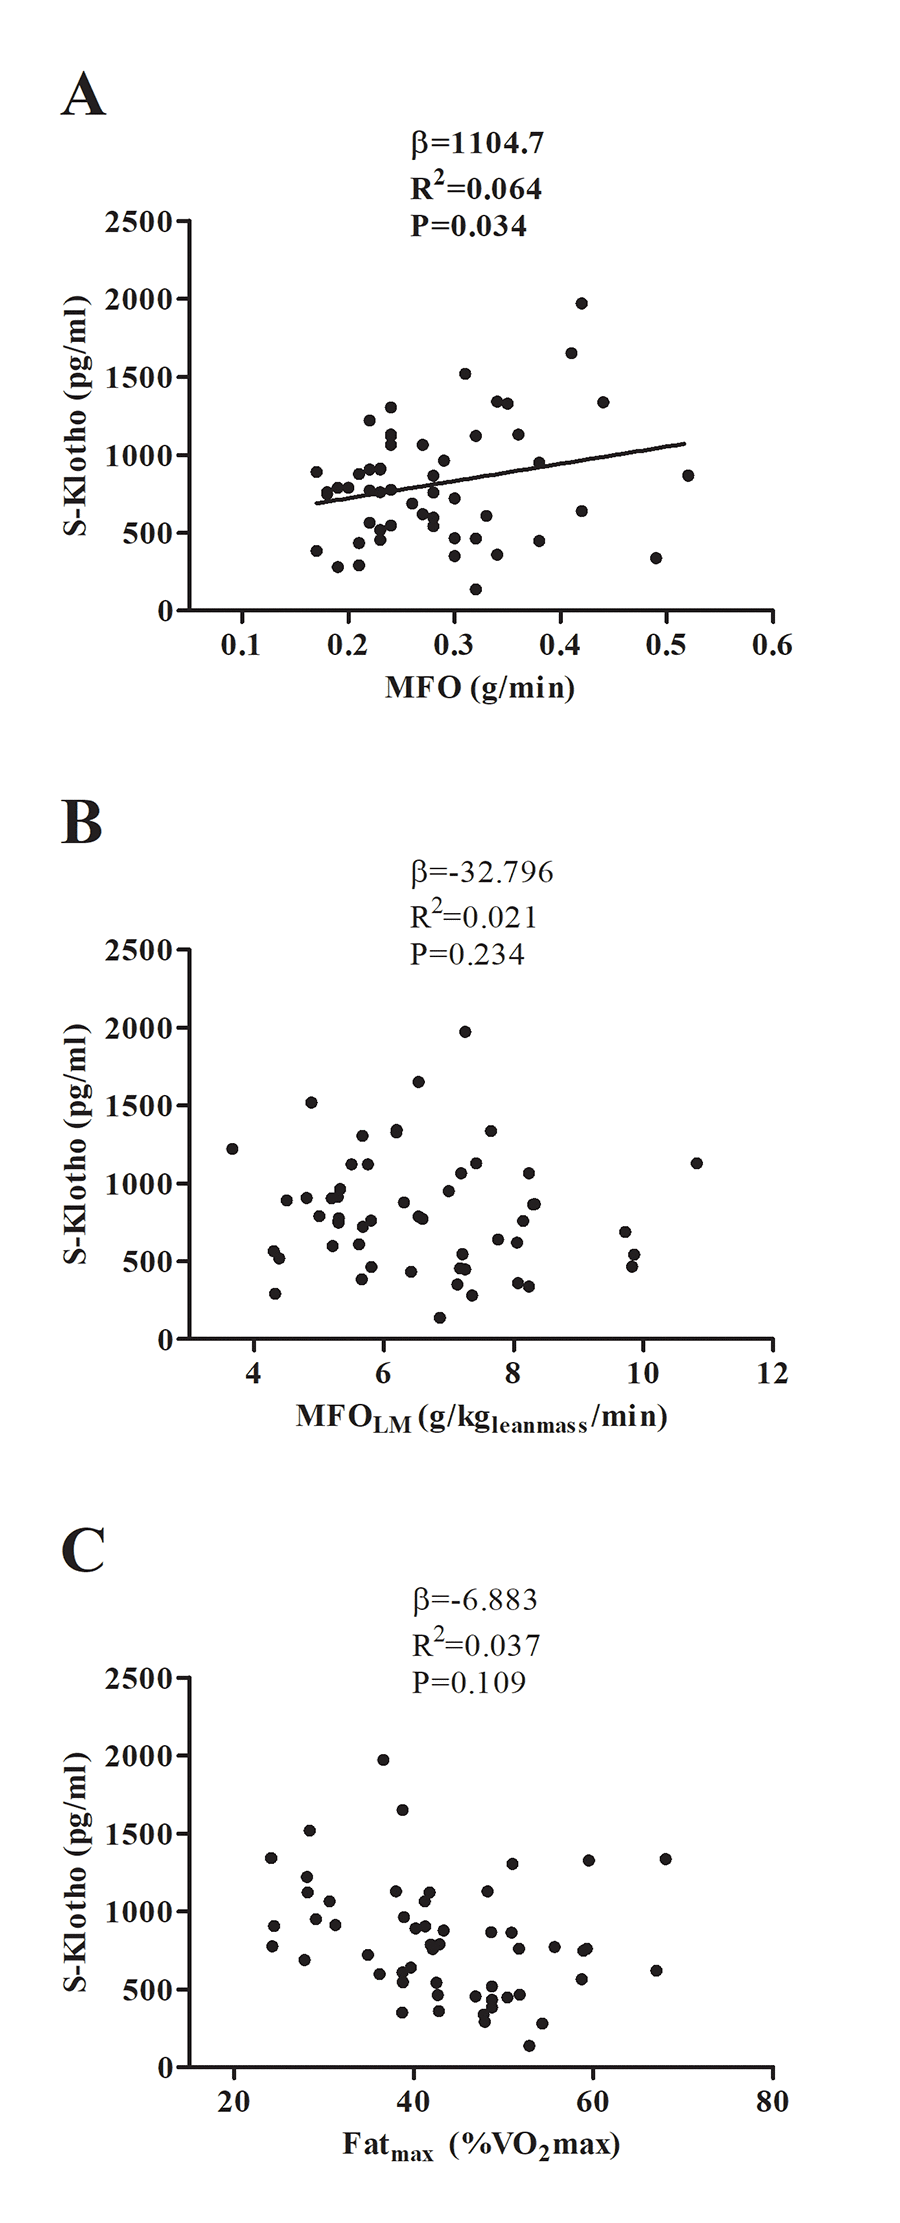 Association between maximal fat oxidation (MFO) (A, B), and the intensity of exercise that elicits MFO (Fatmax) (C) with plasma S-klotho. β (unstandardized regression coefficient), R2 and P are from simple linear regression analysis. Abbreviations: MFO; Maximal Fat Oxidation, MFOLM; Maximal Fat Oxidation relative to lean mass, Fatmax; Intensity of exercise that elicits MFO, VO2max; Maximal Oxygen Uptake.